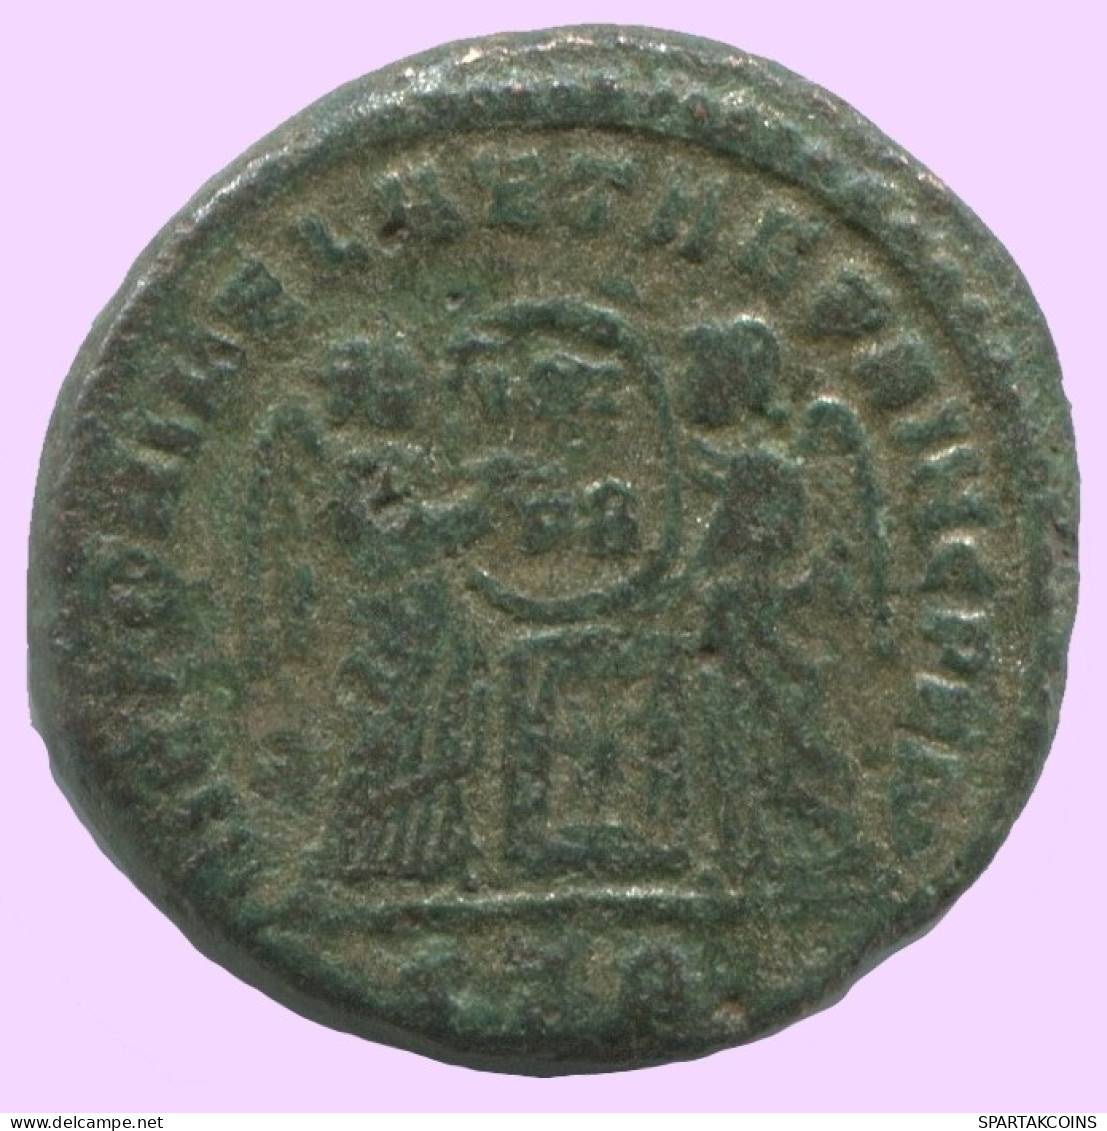 LATE ROMAN EMPIRE Follis Antique Authentique Roman Pièce 2.7g/17mm #ANT2108.7.F.A - The End Of Empire (363 AD To 476 AD)